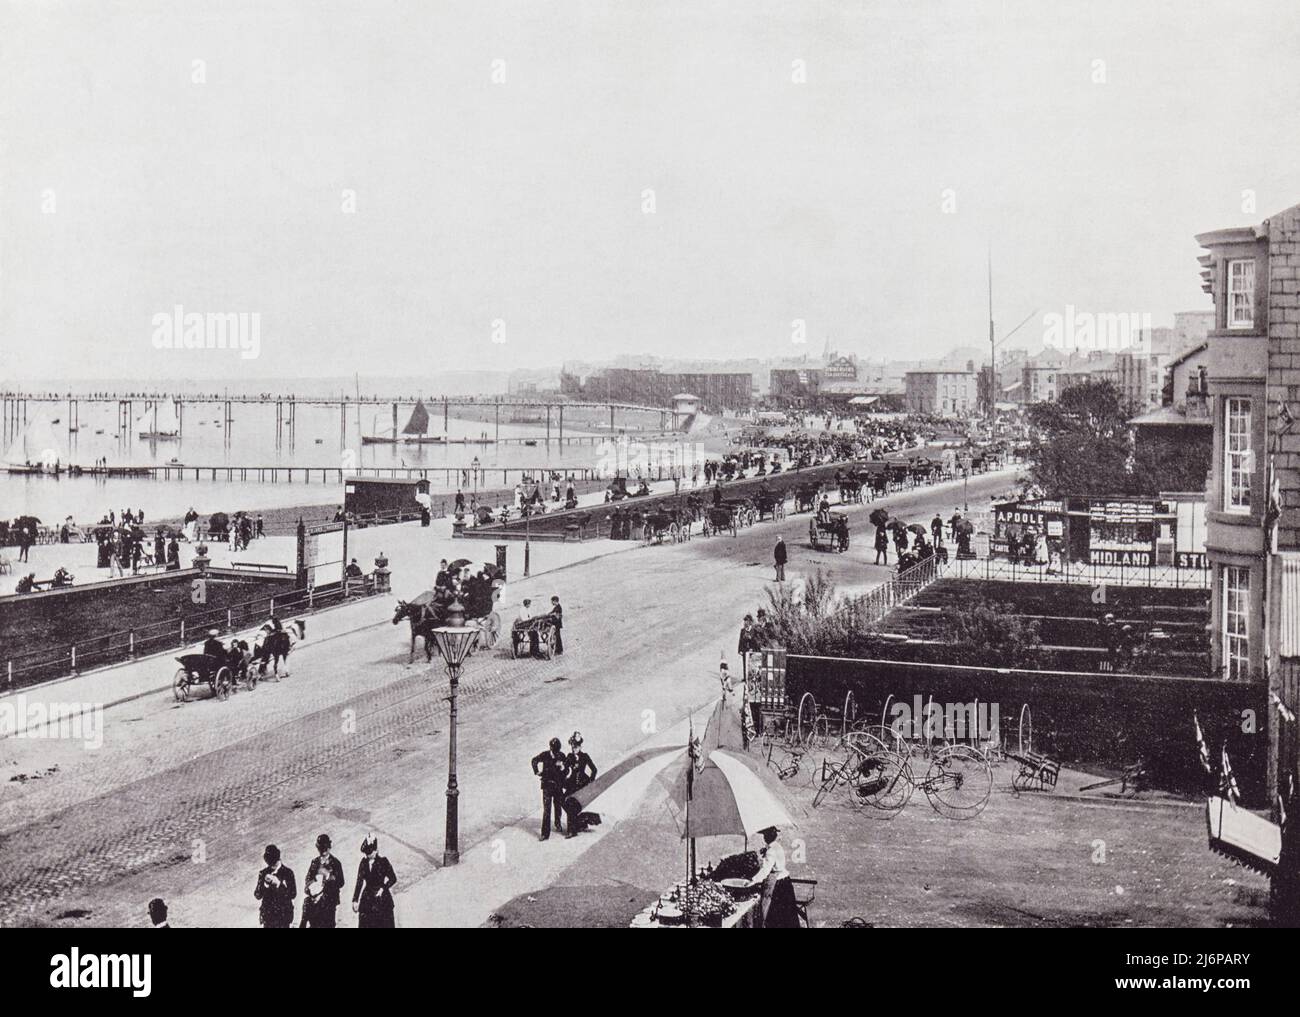 Morecambe, Lancashire, England.  The promenade in the 19th century.  From Around The Coast,  An Album of Pictures from Photographs of the Chief Seaside Places of Interest in Great Britain and Ireland published London, 1895, by George Newnes Limited. Stock Photo